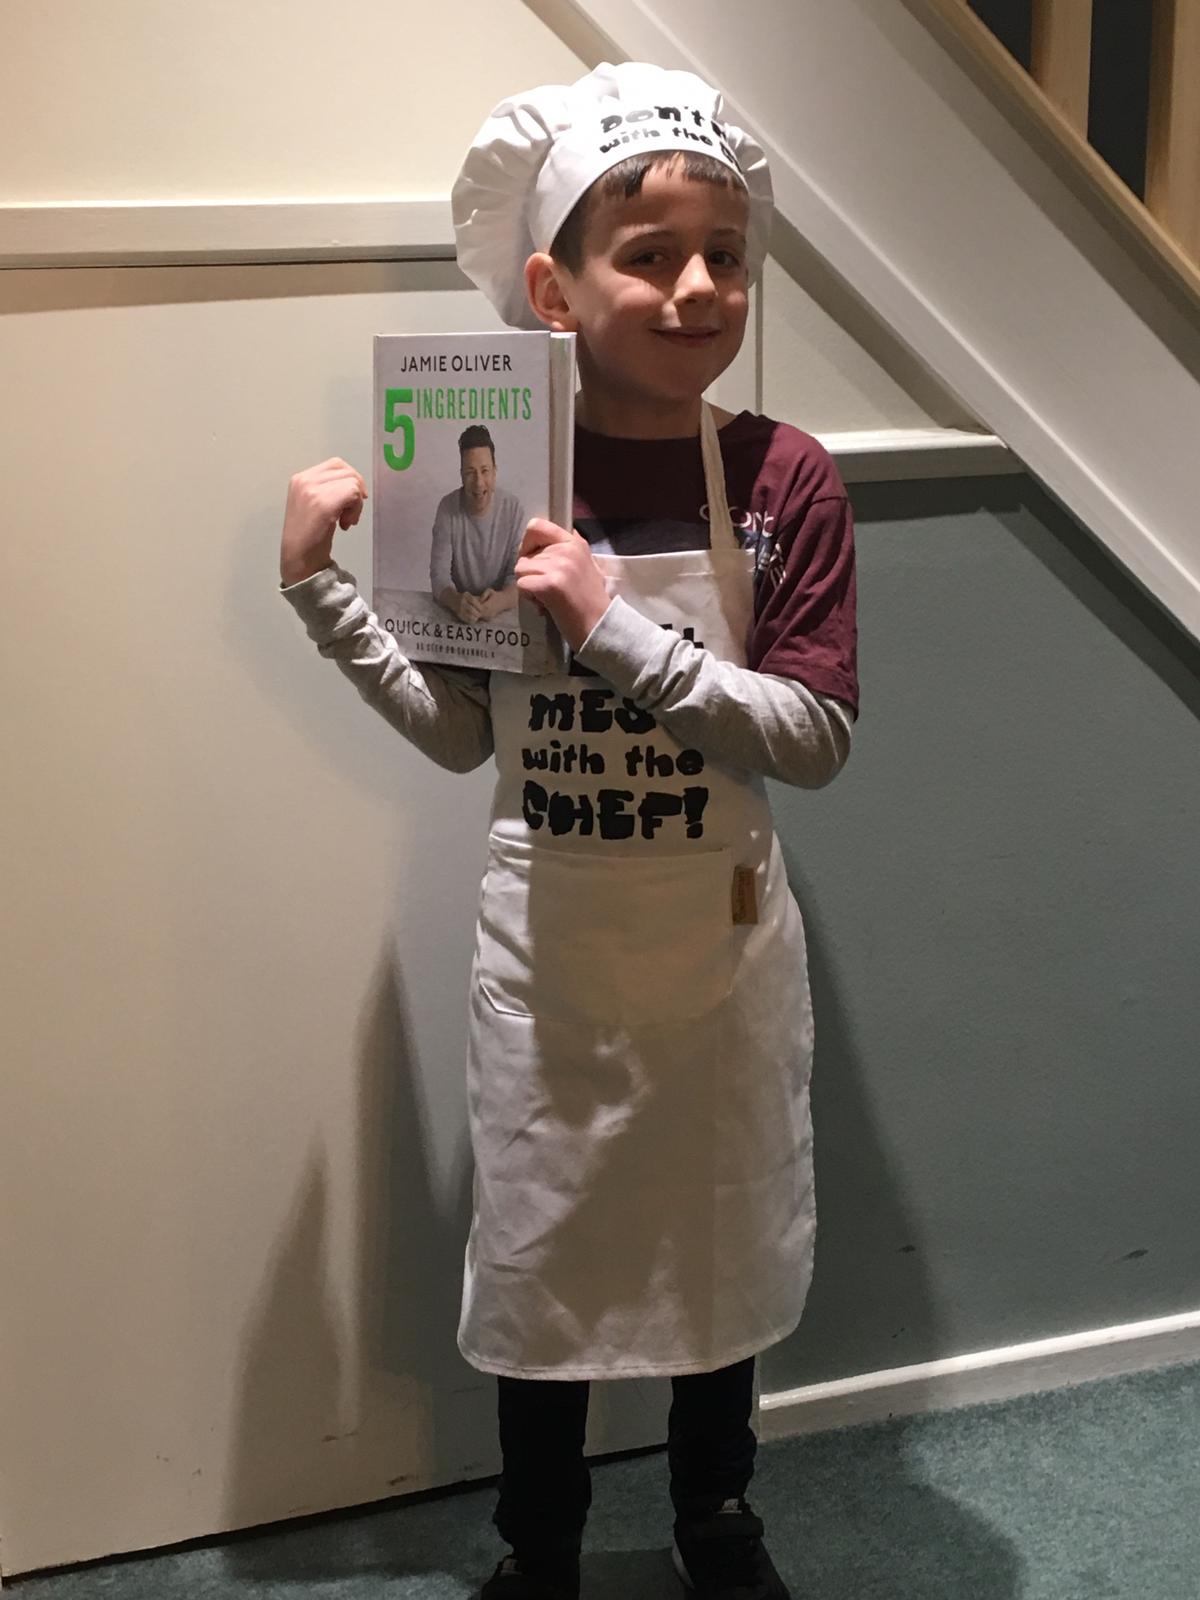 Jamie Oliver on Twitter: "@mrsmaz82 Hi Sayeh, we'd love to send your  budding chef a little gift for such a brilliant costume. Please, could you  pop your details across to us here